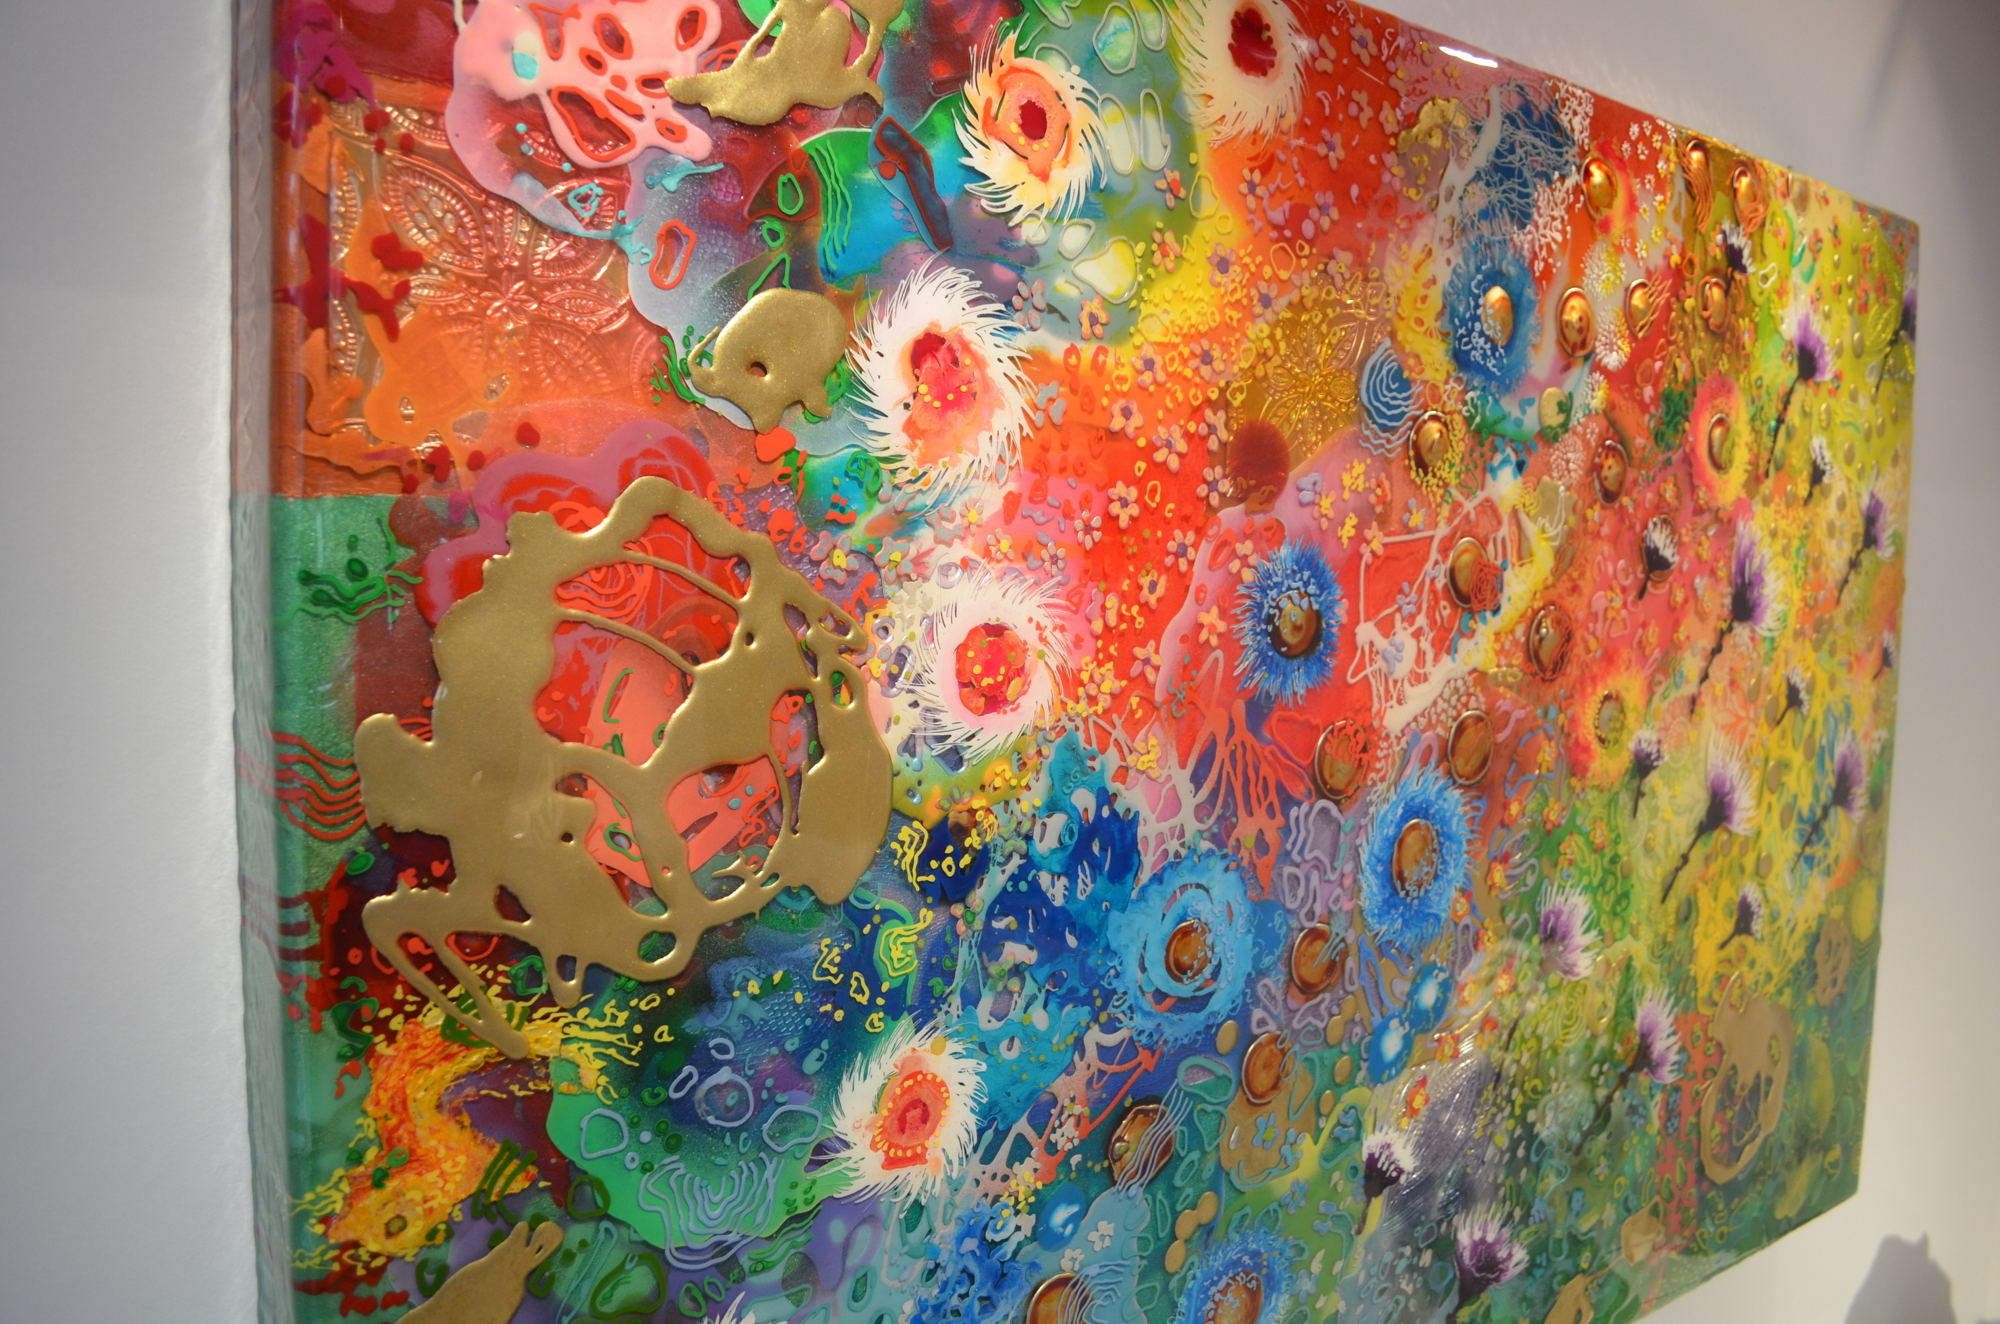 Reich is well-known for her bold, colorful paintings that create depth by layering epoxy resin on a canvas.